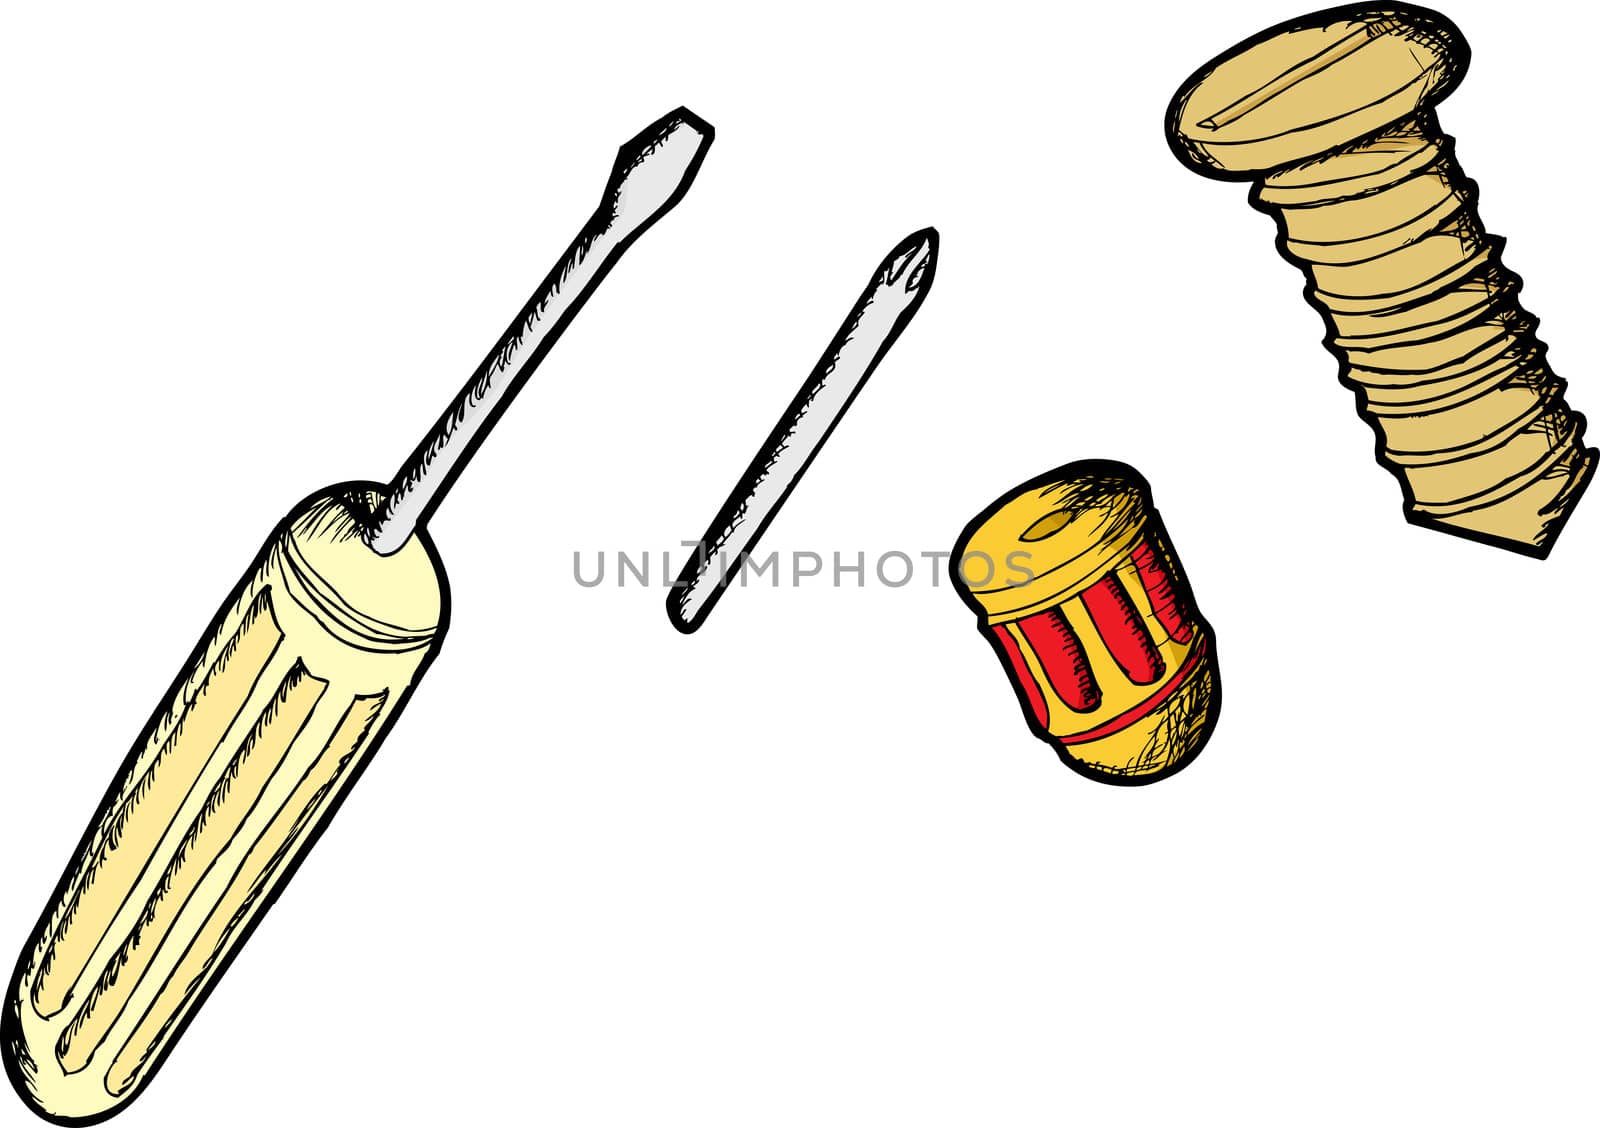 Cartoons of different screwdrivers and a screw over white